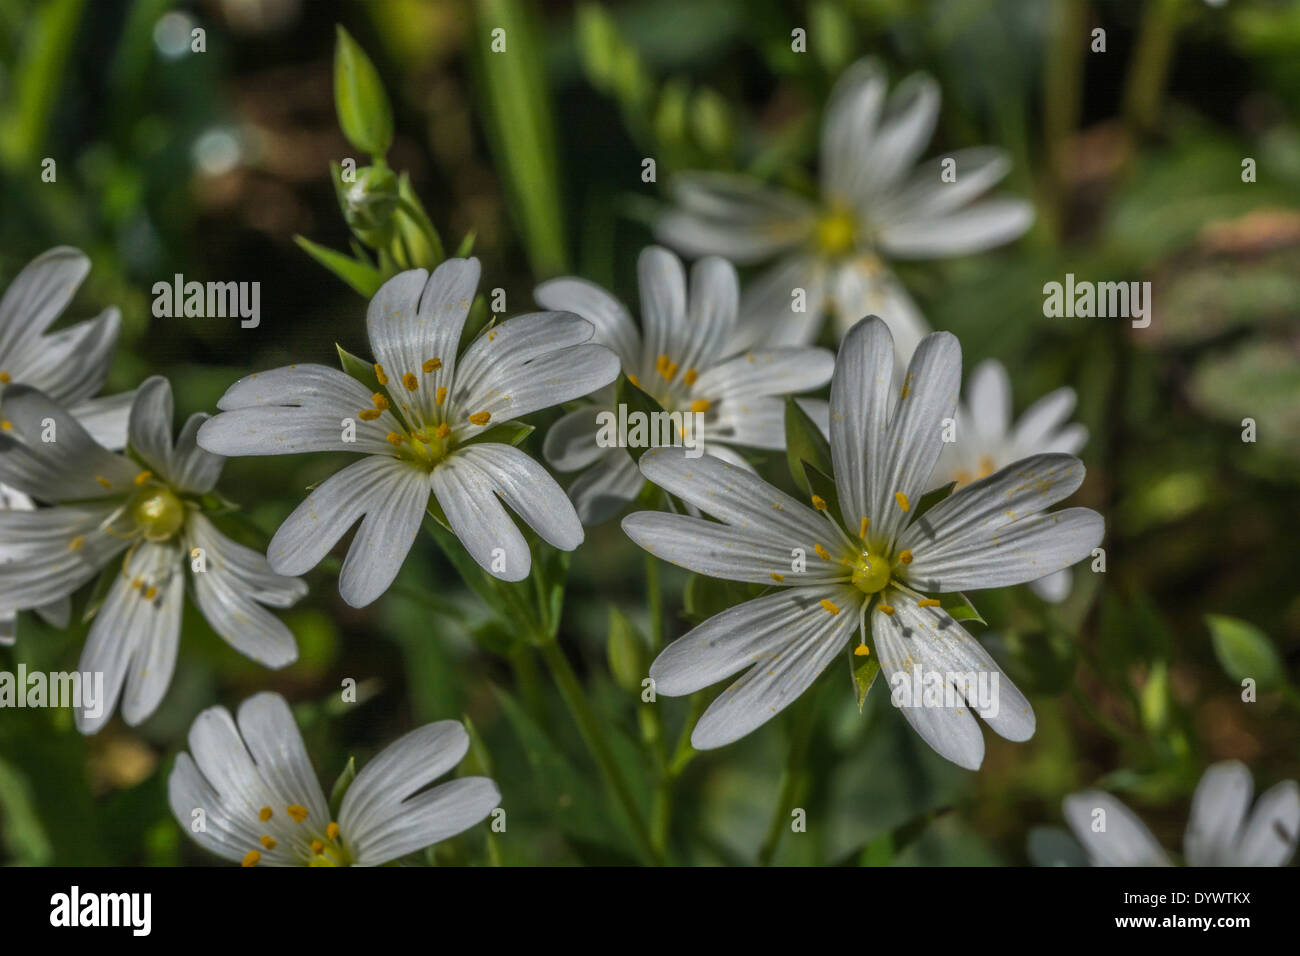 White flowers of Greater Stitchwort / Stellaria holostea. Former medicinal plant used in herbal remedies. Stock Photo